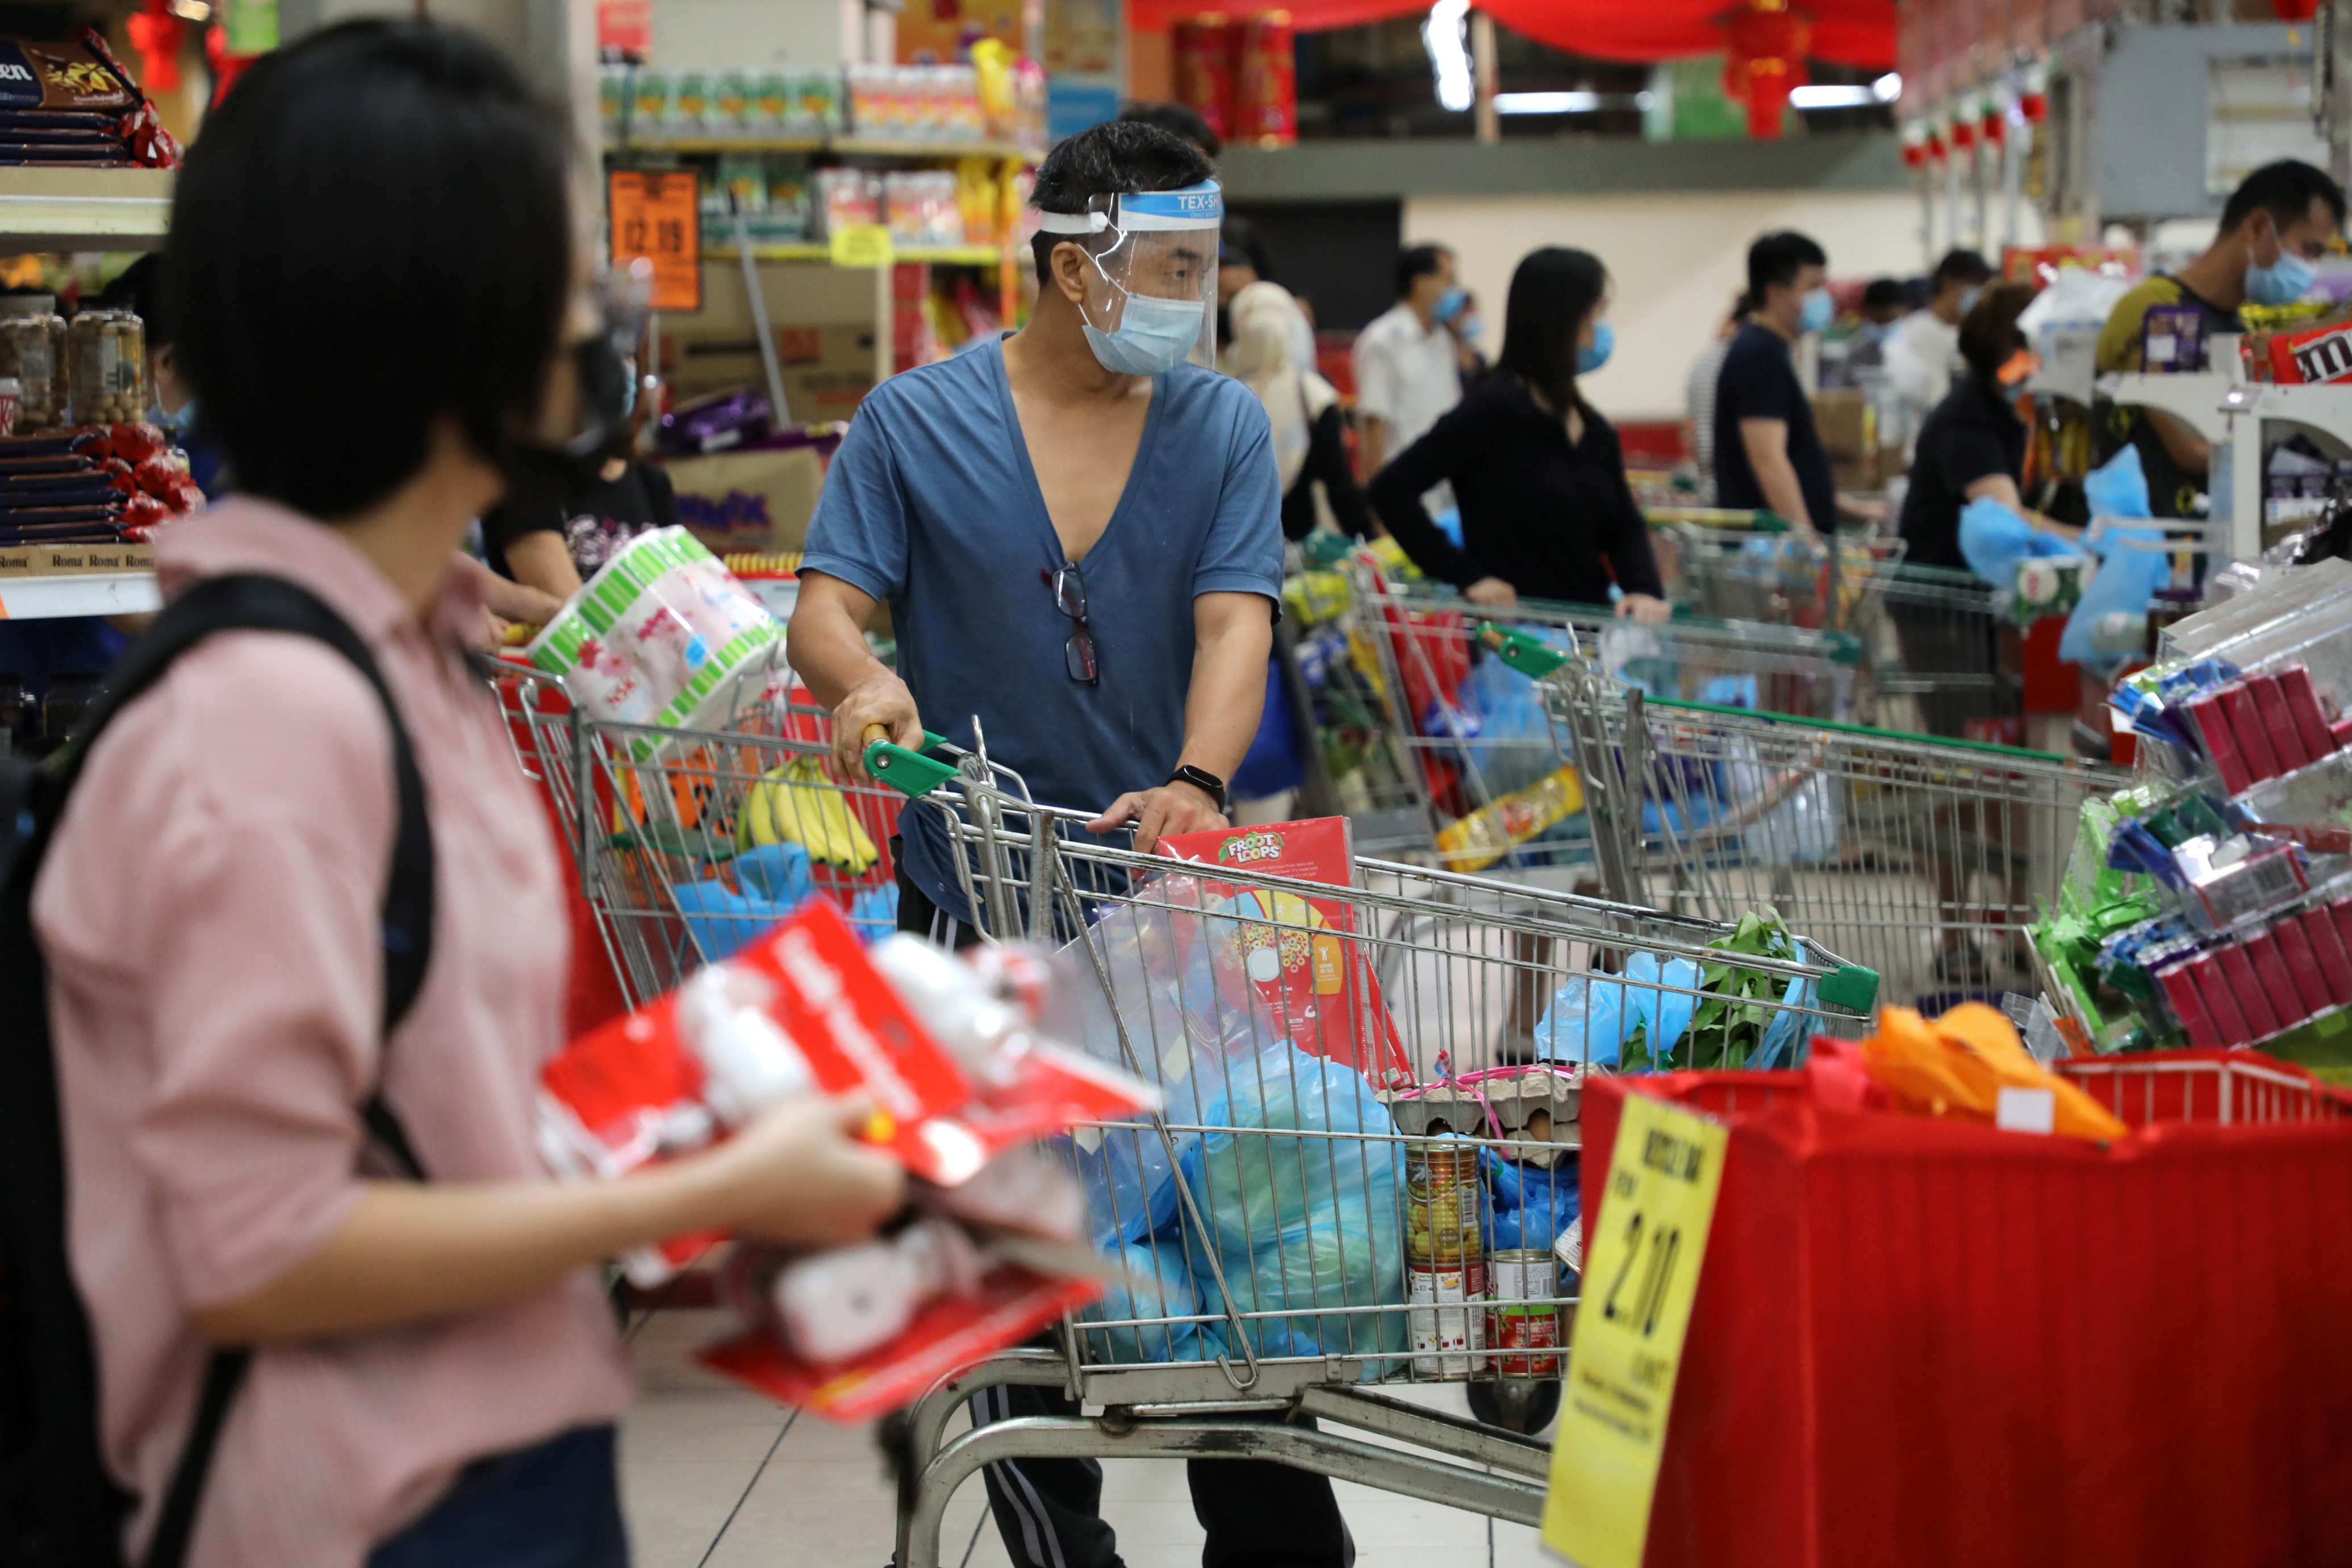 People line up to pay at a supermarket, amid the coronavirus disease (COVID-19) outbreak in Kuala Lumpur